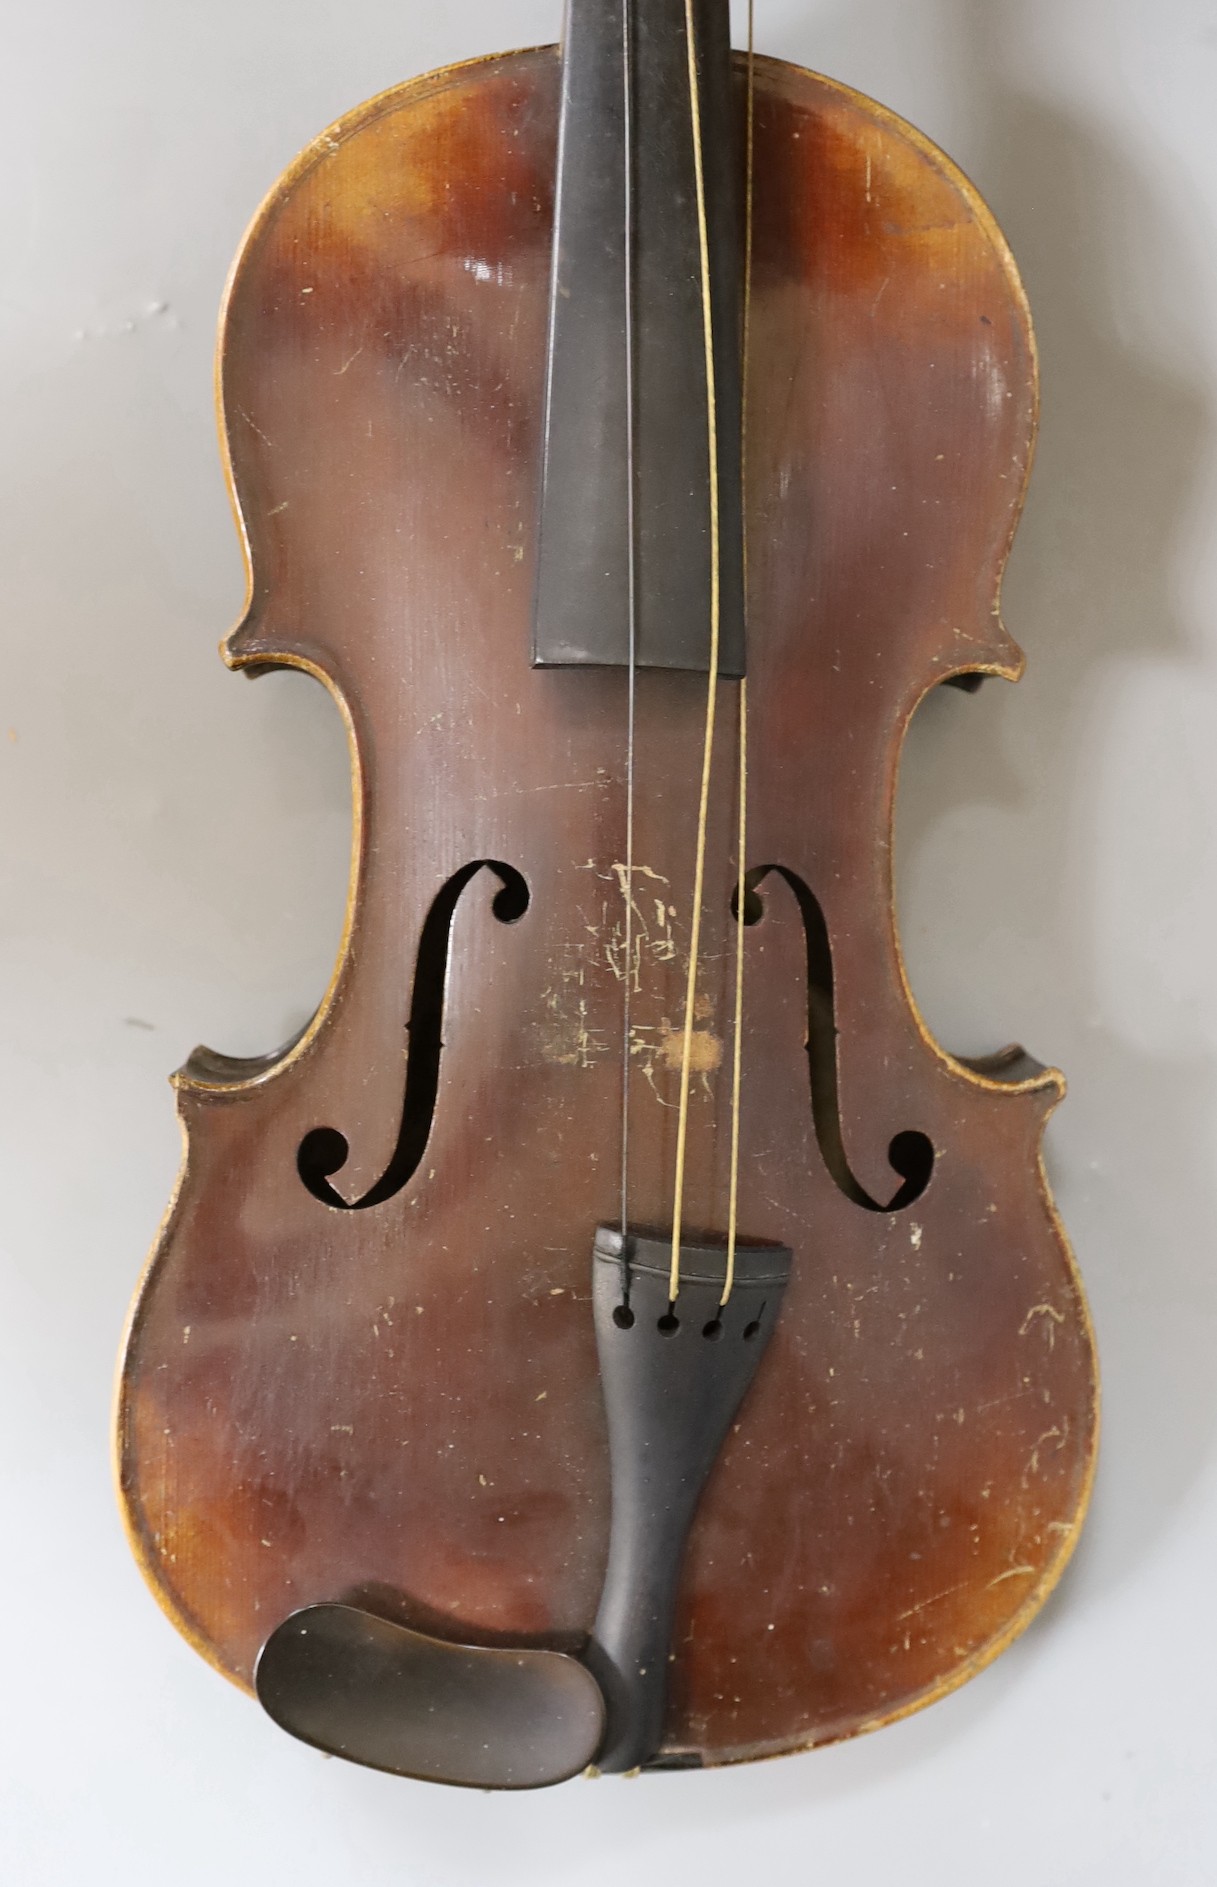 A cased German violin, labelled Stradivarius and dated 1886, back measures 36cm excl button